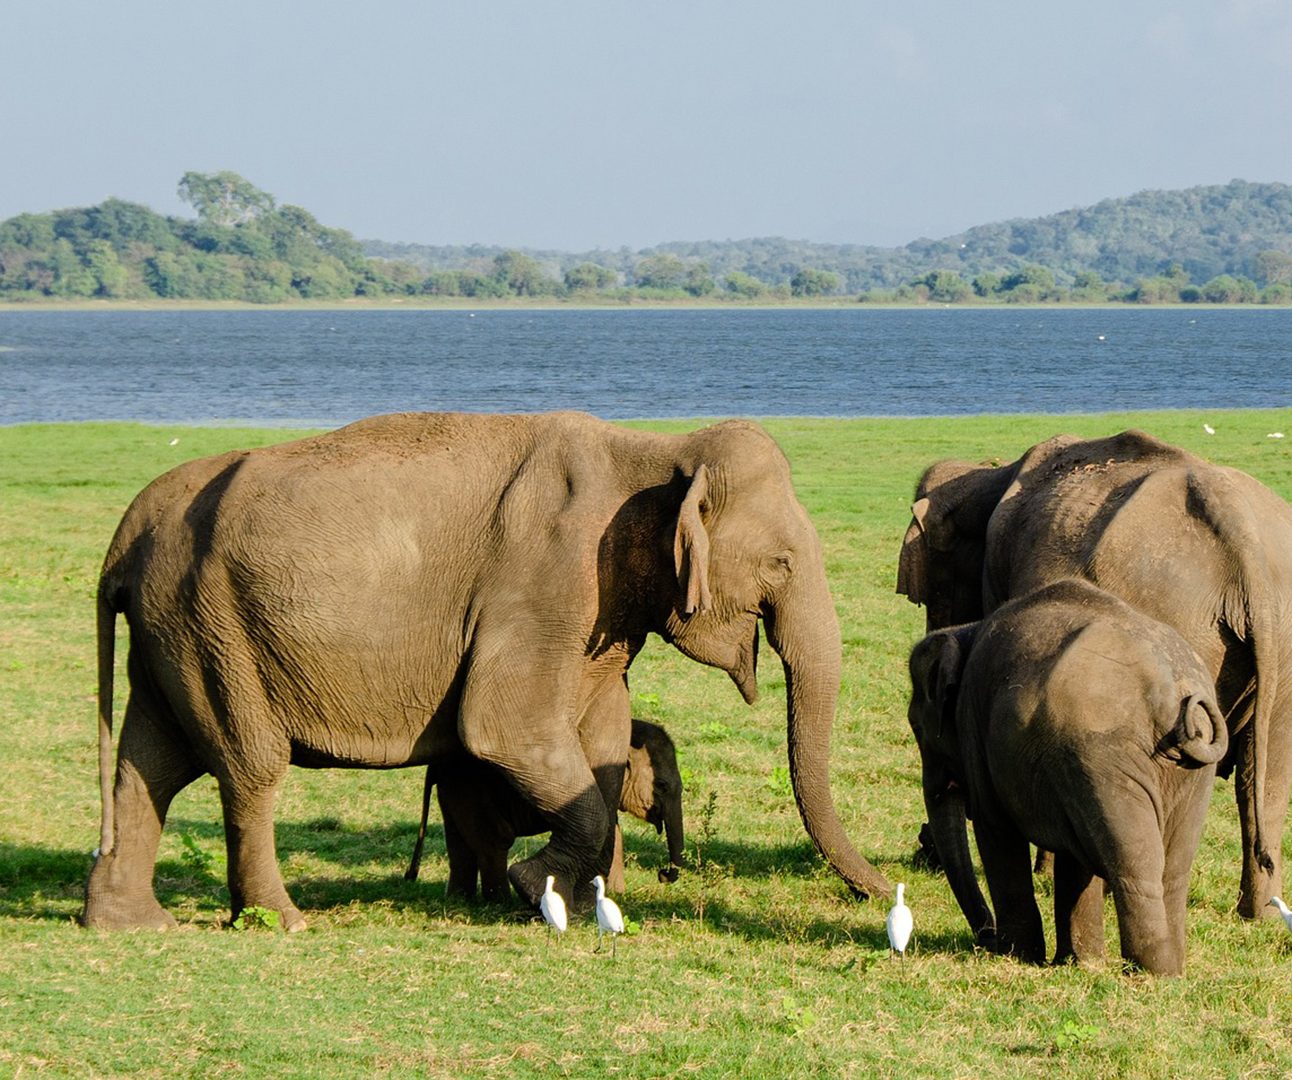 Two Asian elephants stood on a grassy plain in front of a lake